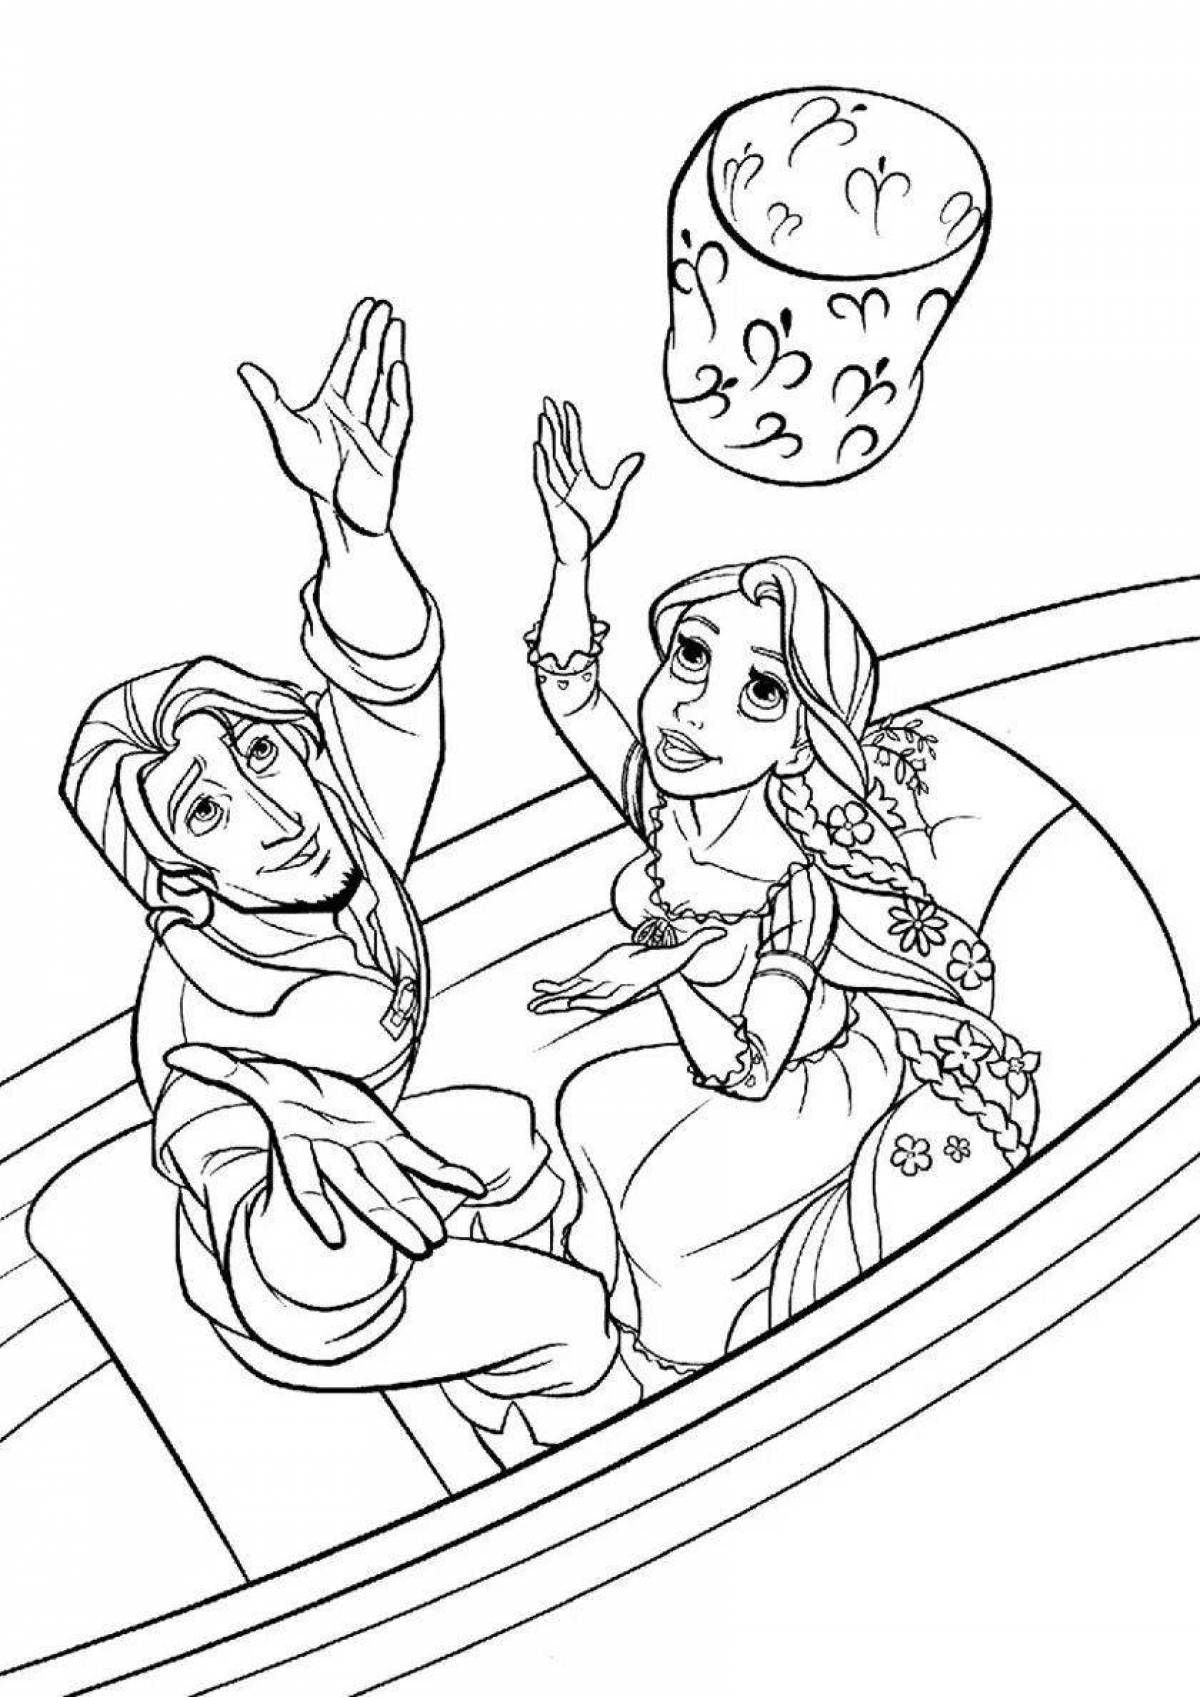 Tangled and Eugene amazing coloring book